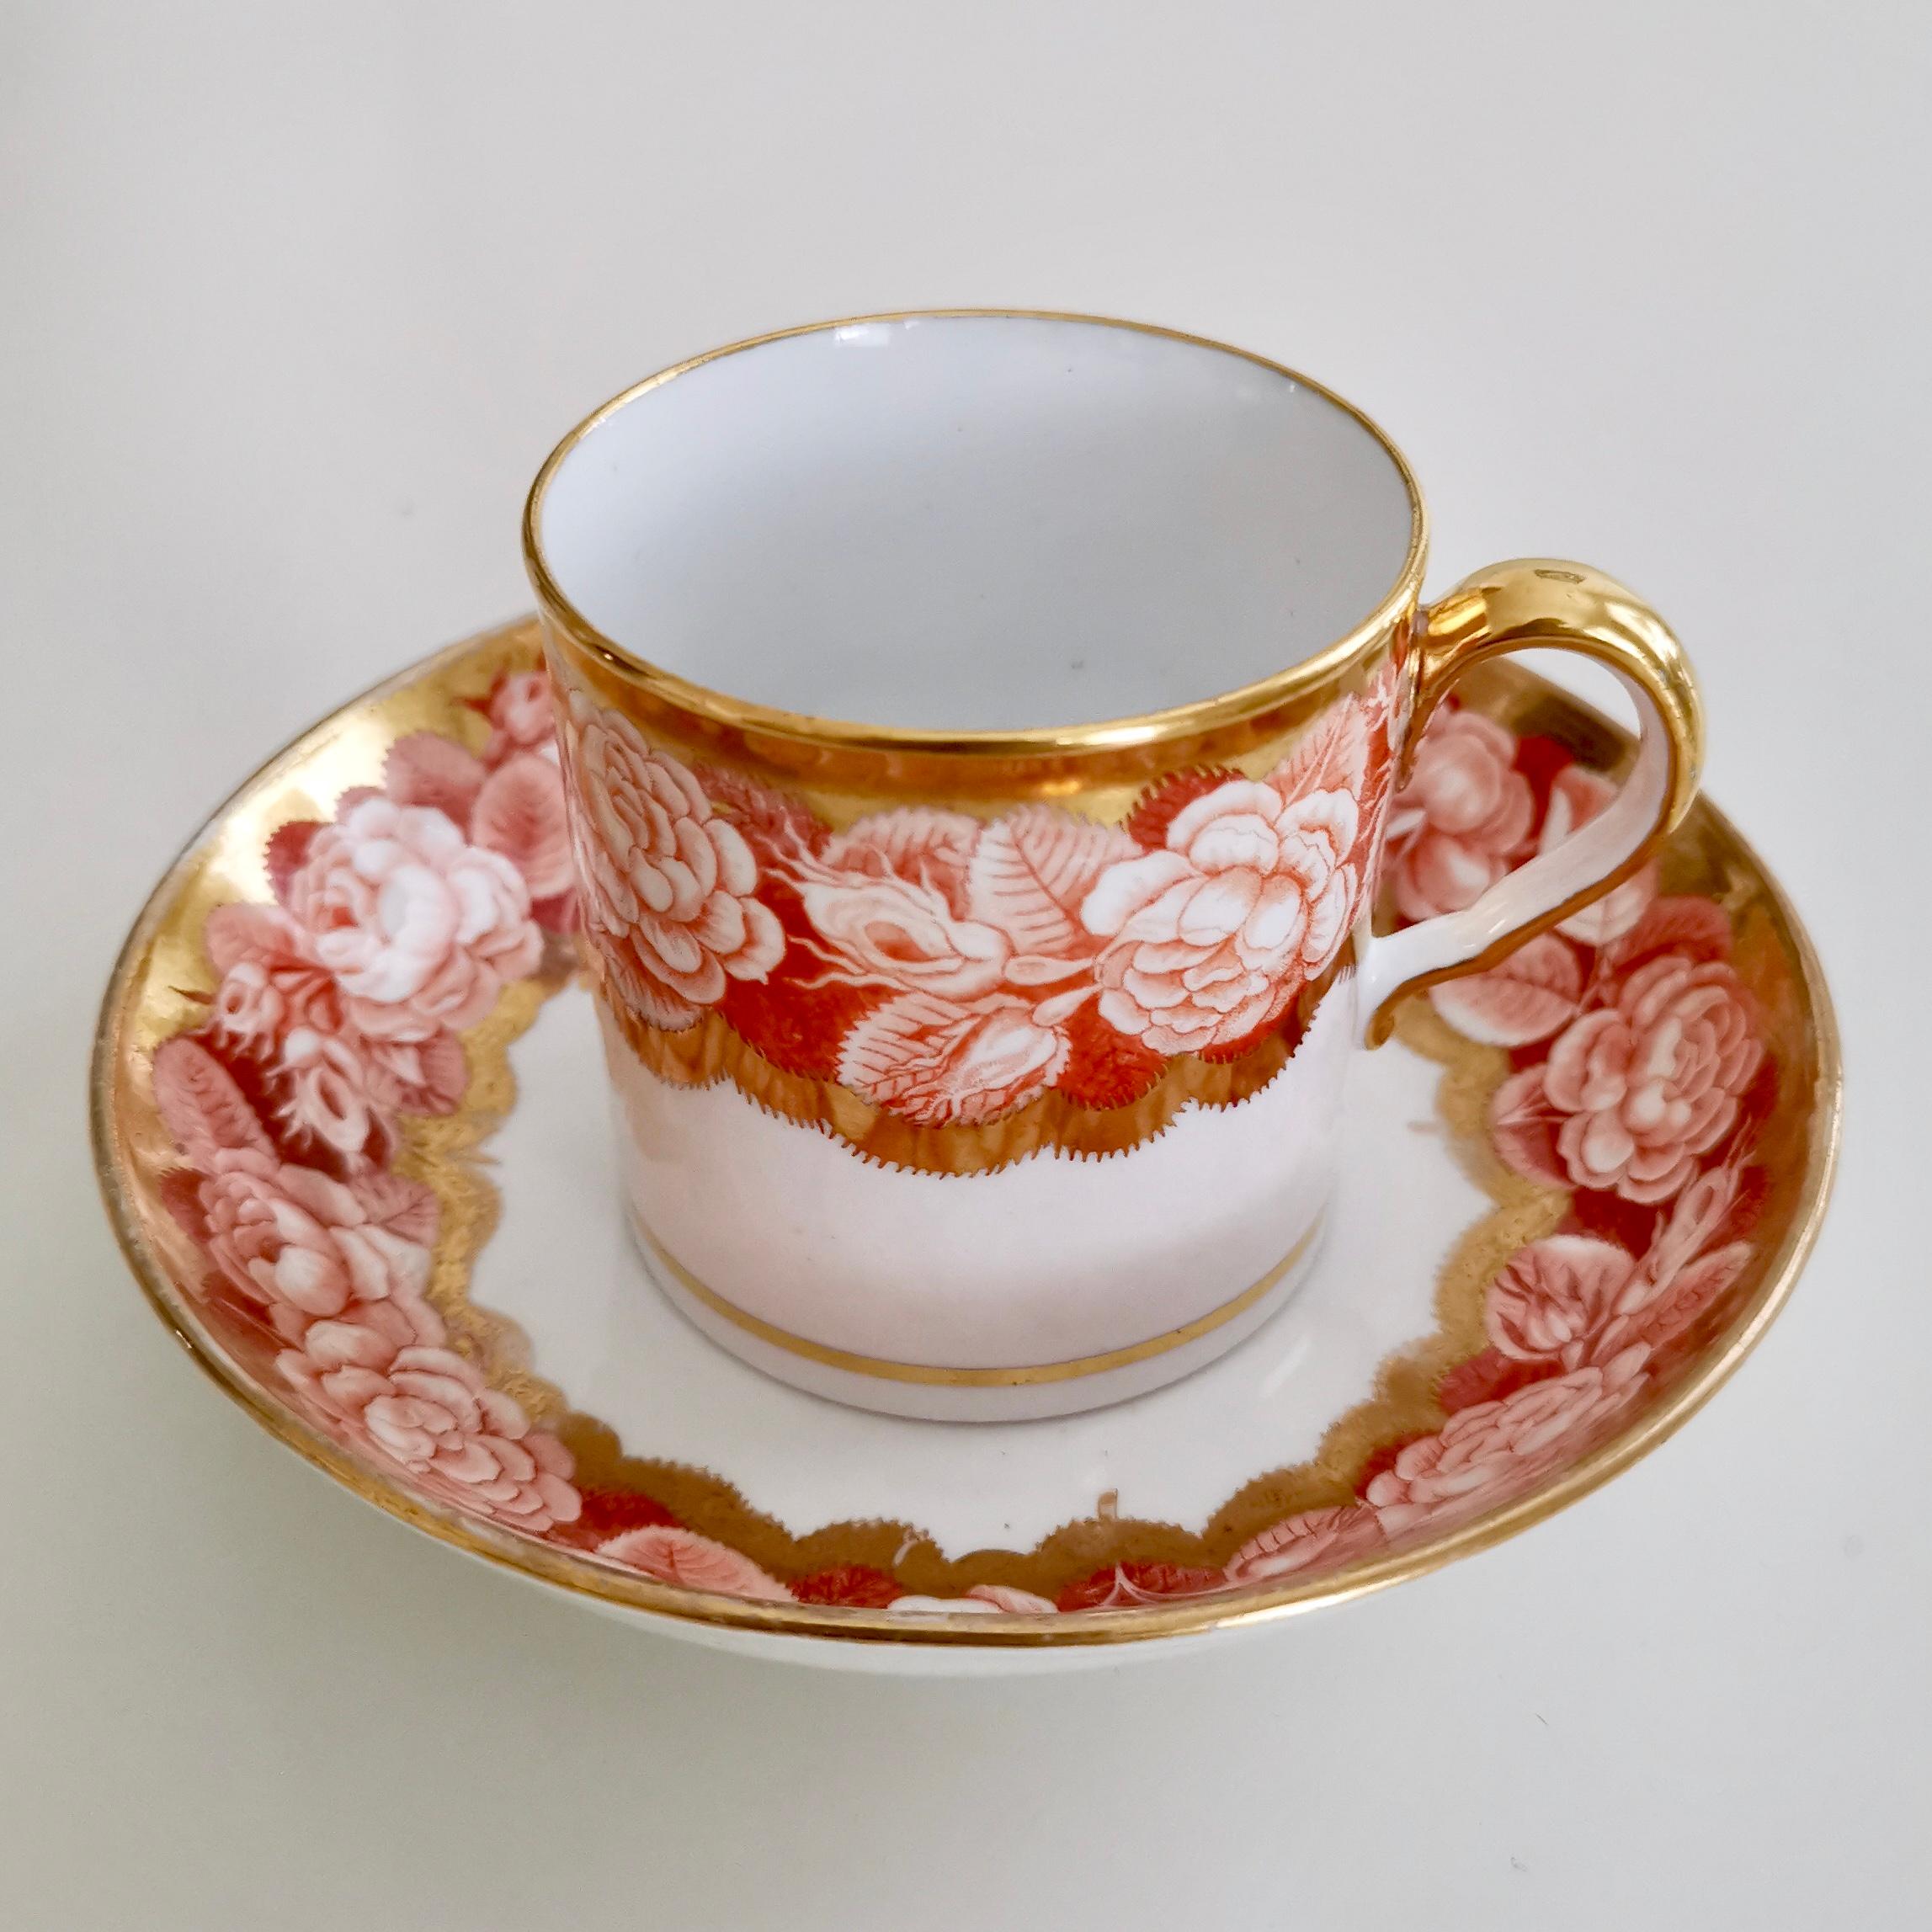 Spode Teacup Trio, Red Pluck and Dust Rose Border, Georgian, circa 1806 3